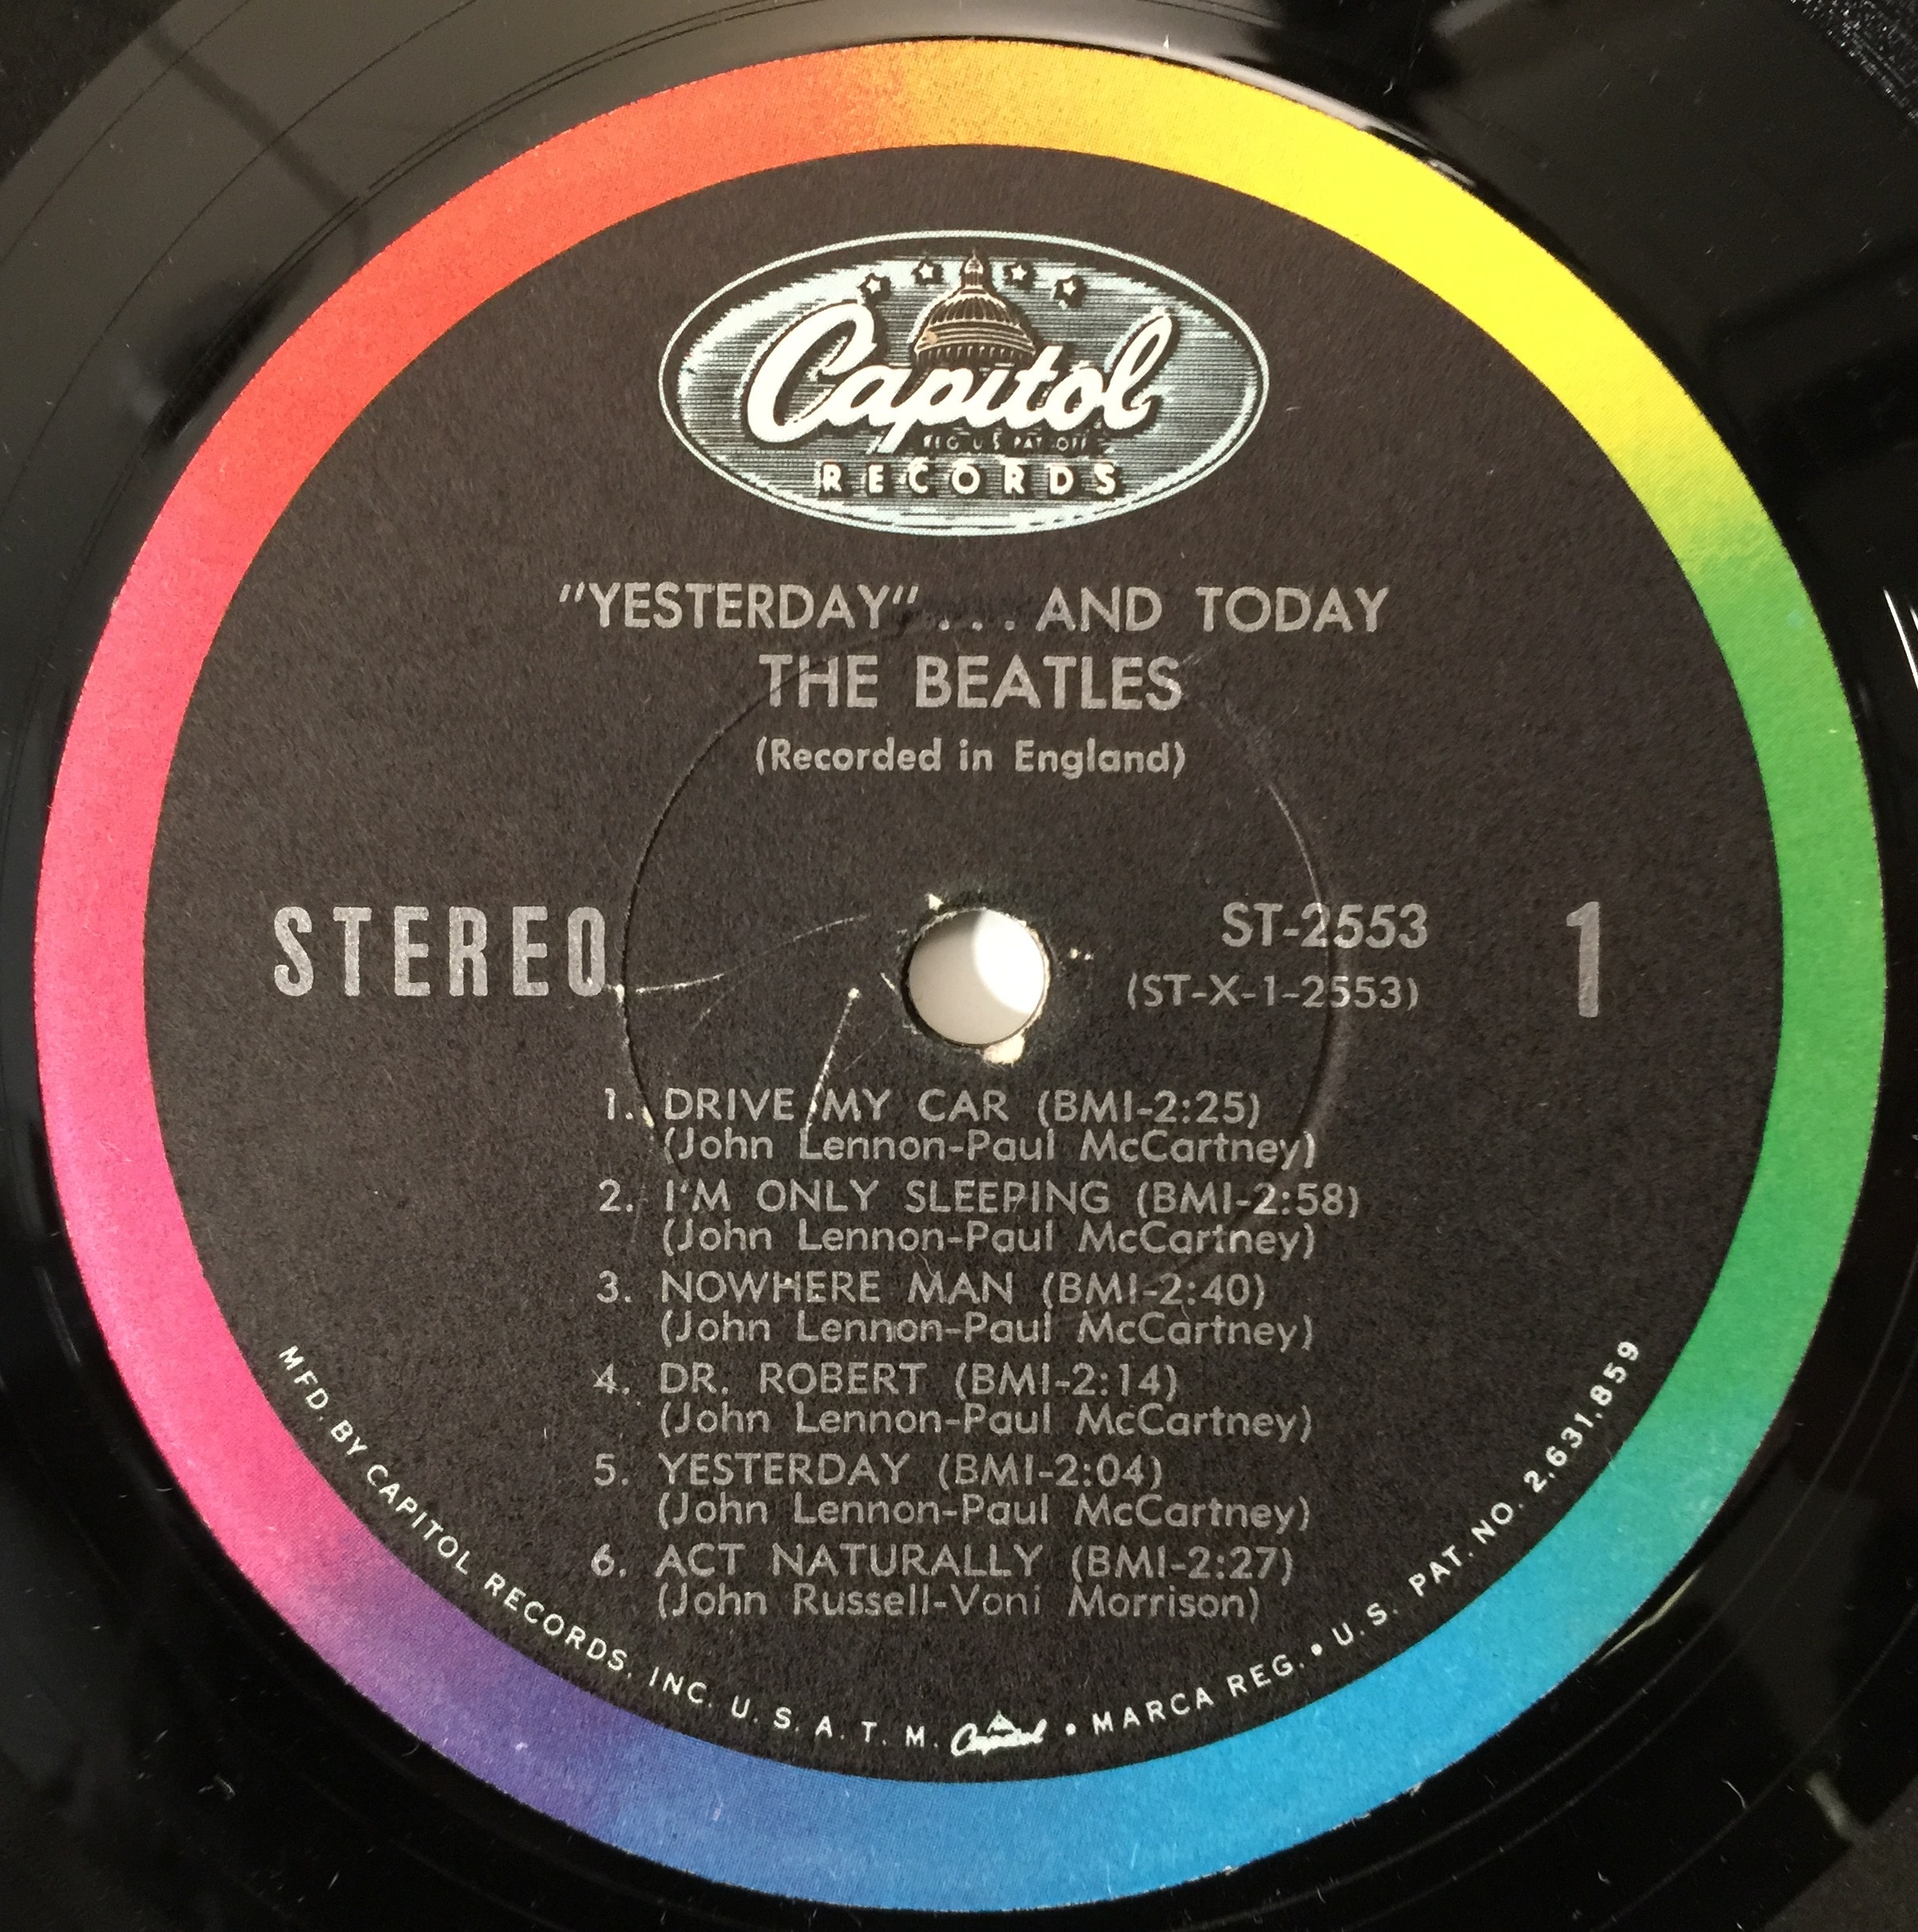 Lot 272 - THE BEATLES - 'BUTCHER COVER' - YESTERDAY